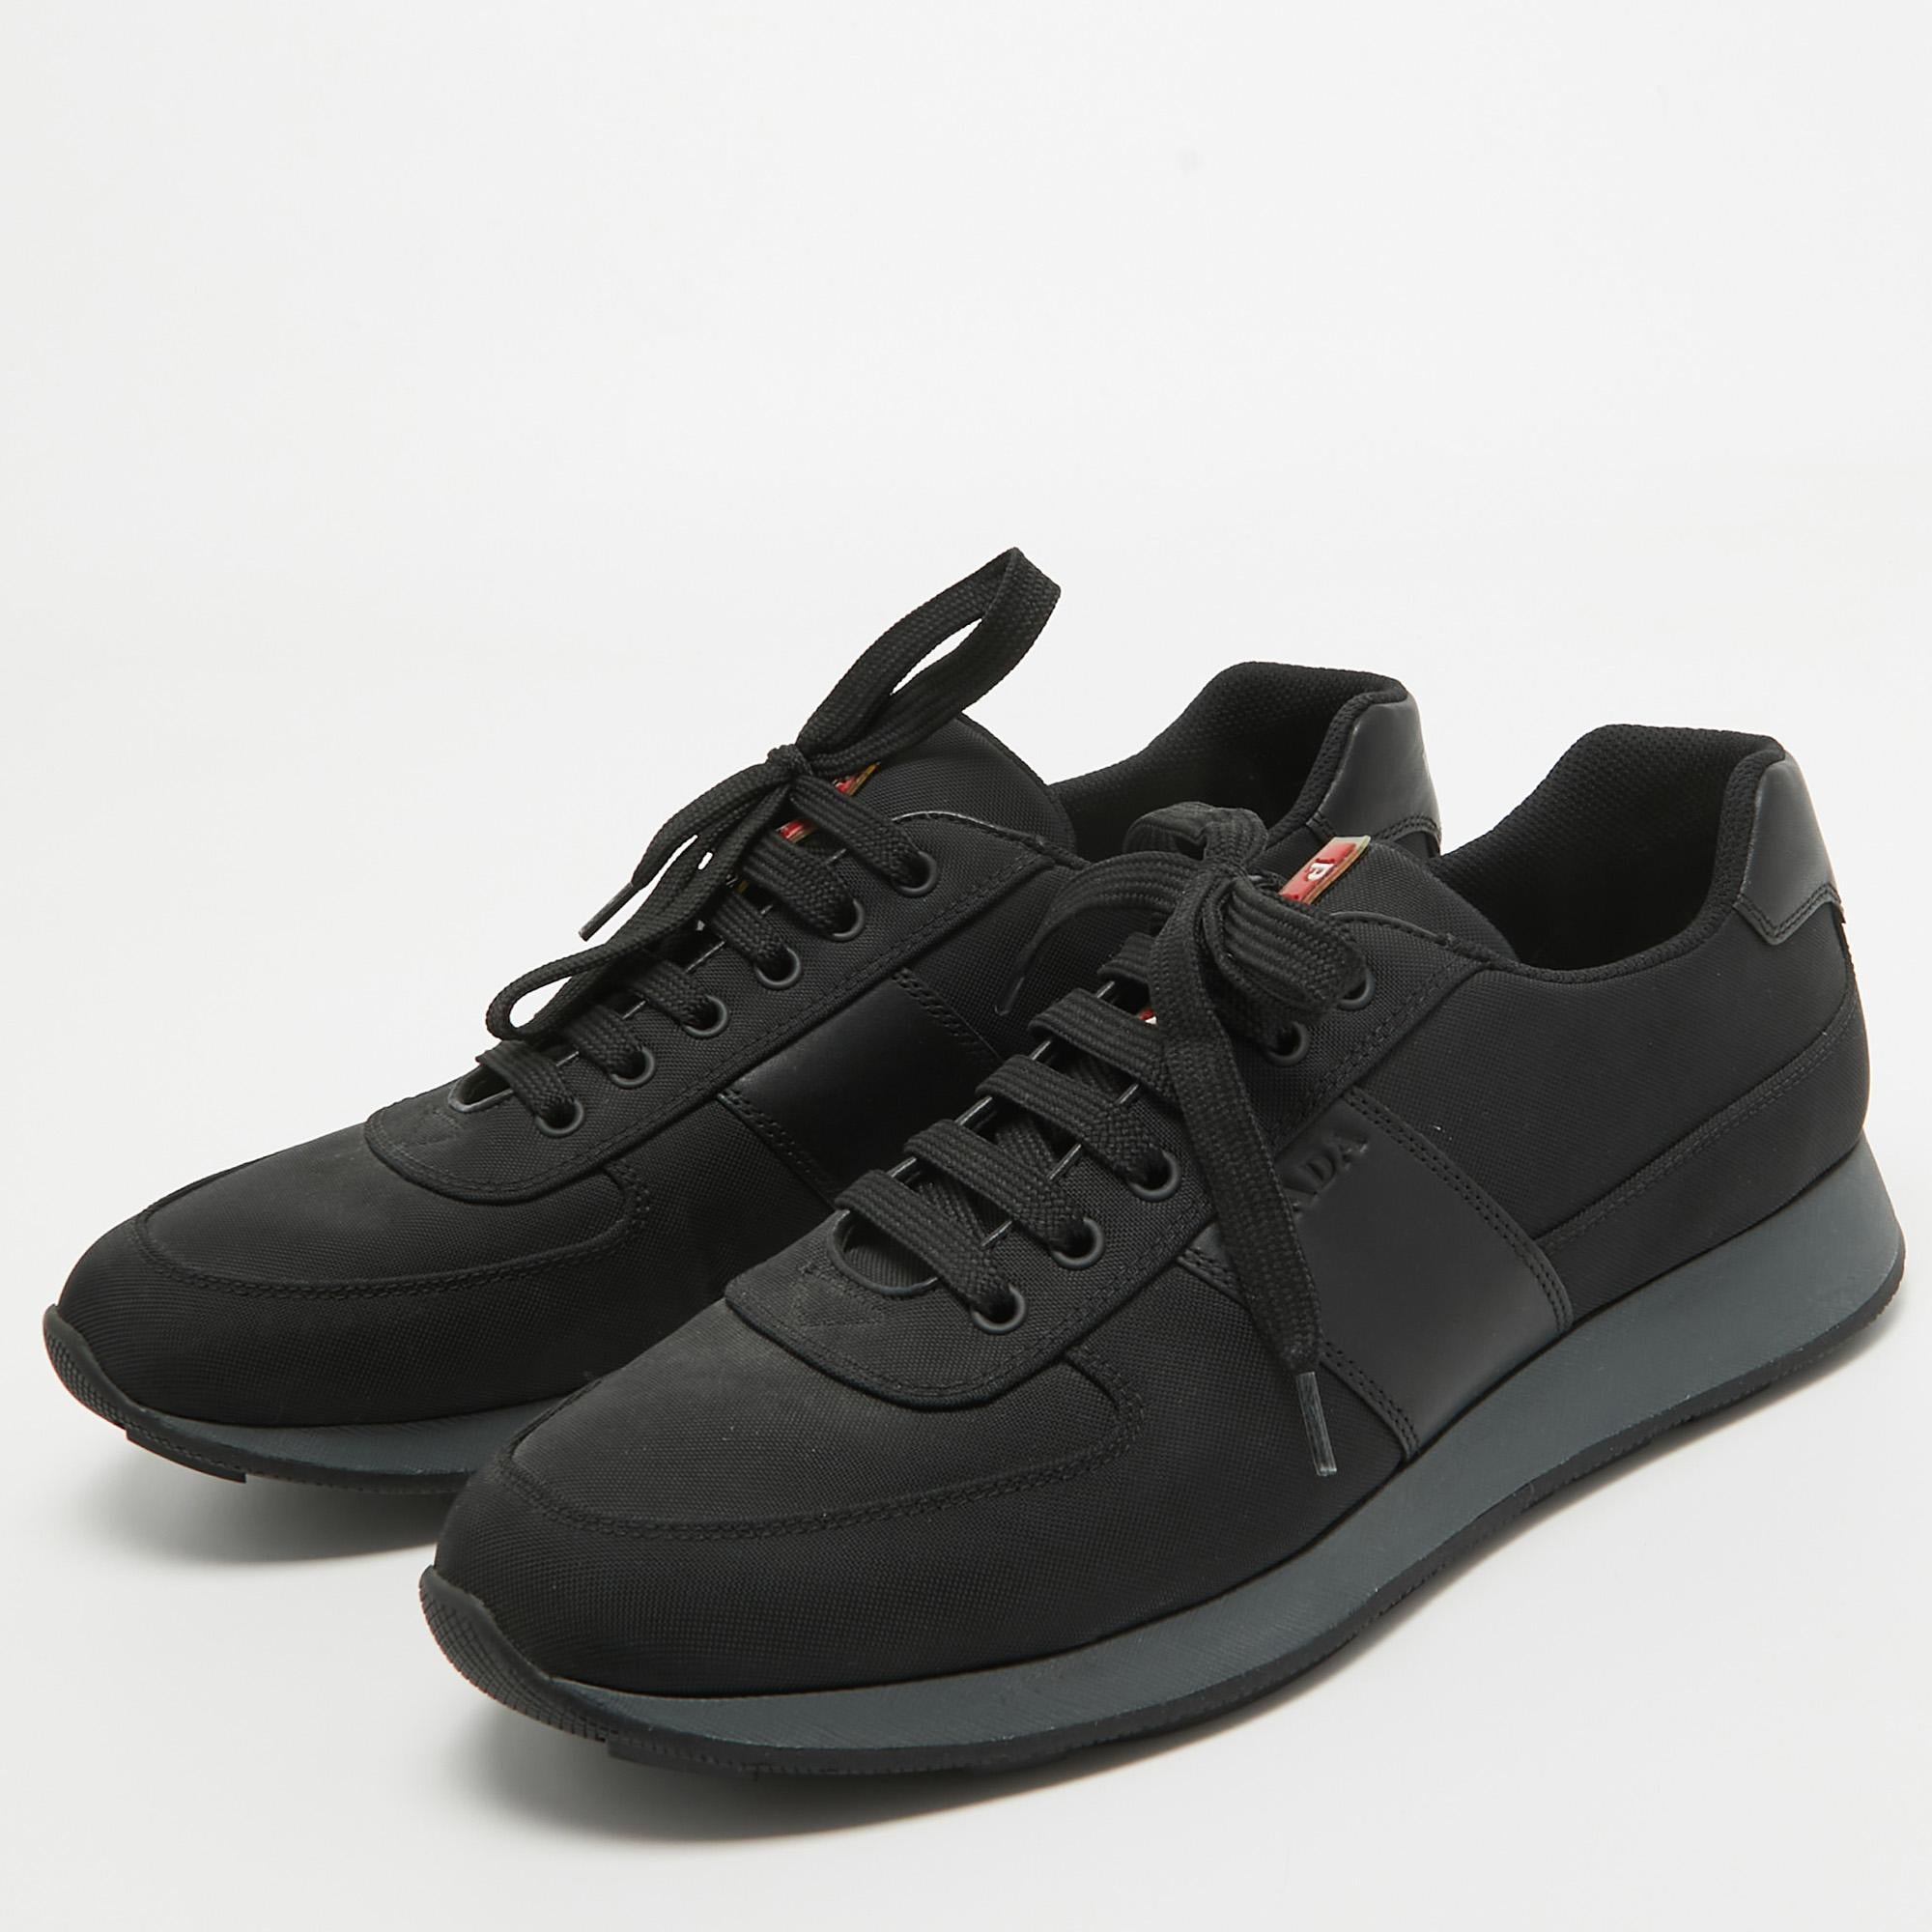 Prada Sport Black Canvas and Leather Low Top Sneakers Size 44 4